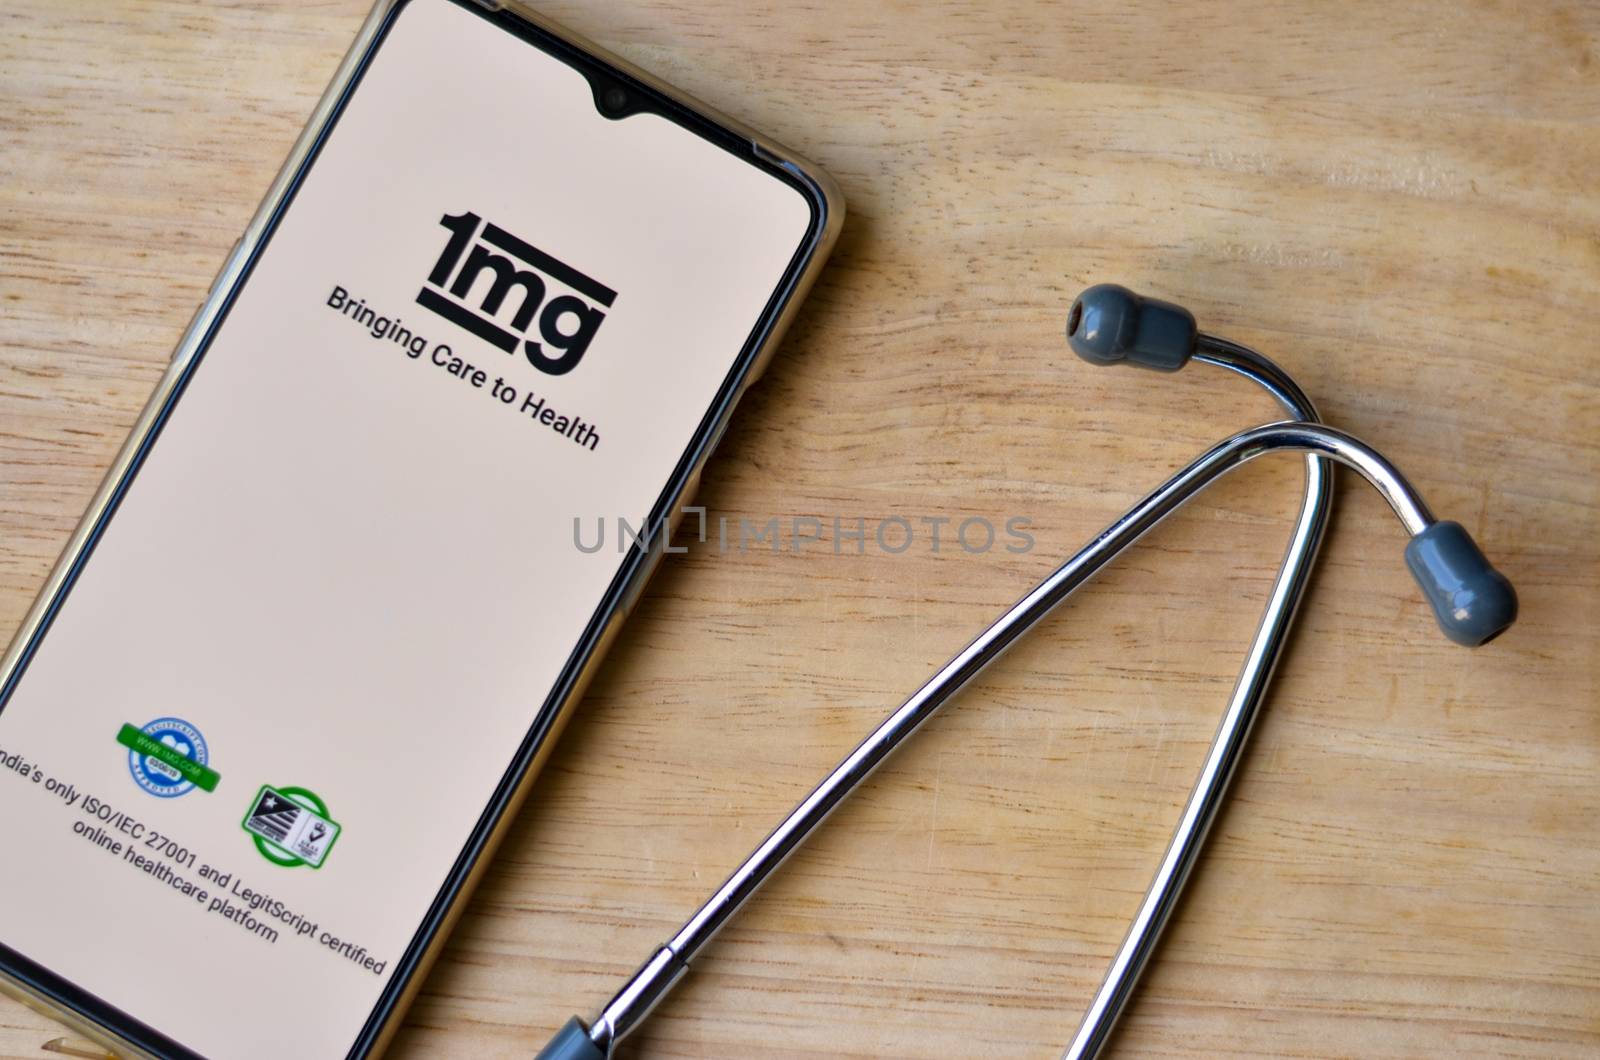 New Delhi, India, 2020.Flat Lay - Wooden background with 1MG app on the mobile phone & stethoscope. Only essential services/products are allowed to be delivered during Corona Virus (Covid-19) lockdown